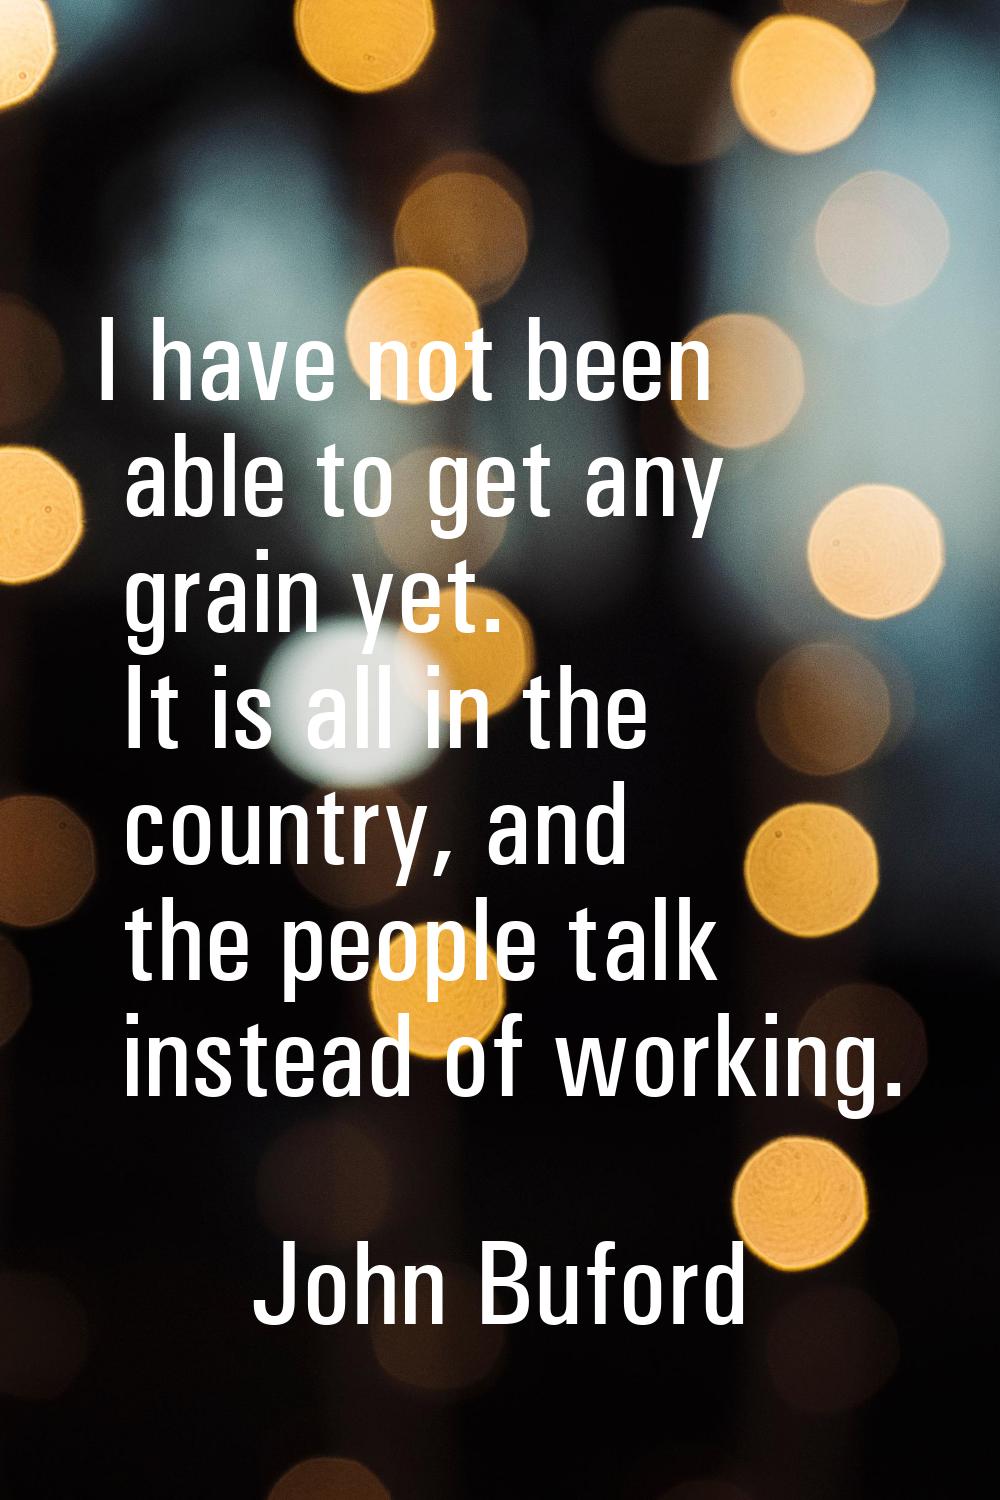 I have not been able to get any grain yet. It is all in the country, and the people talk instead of